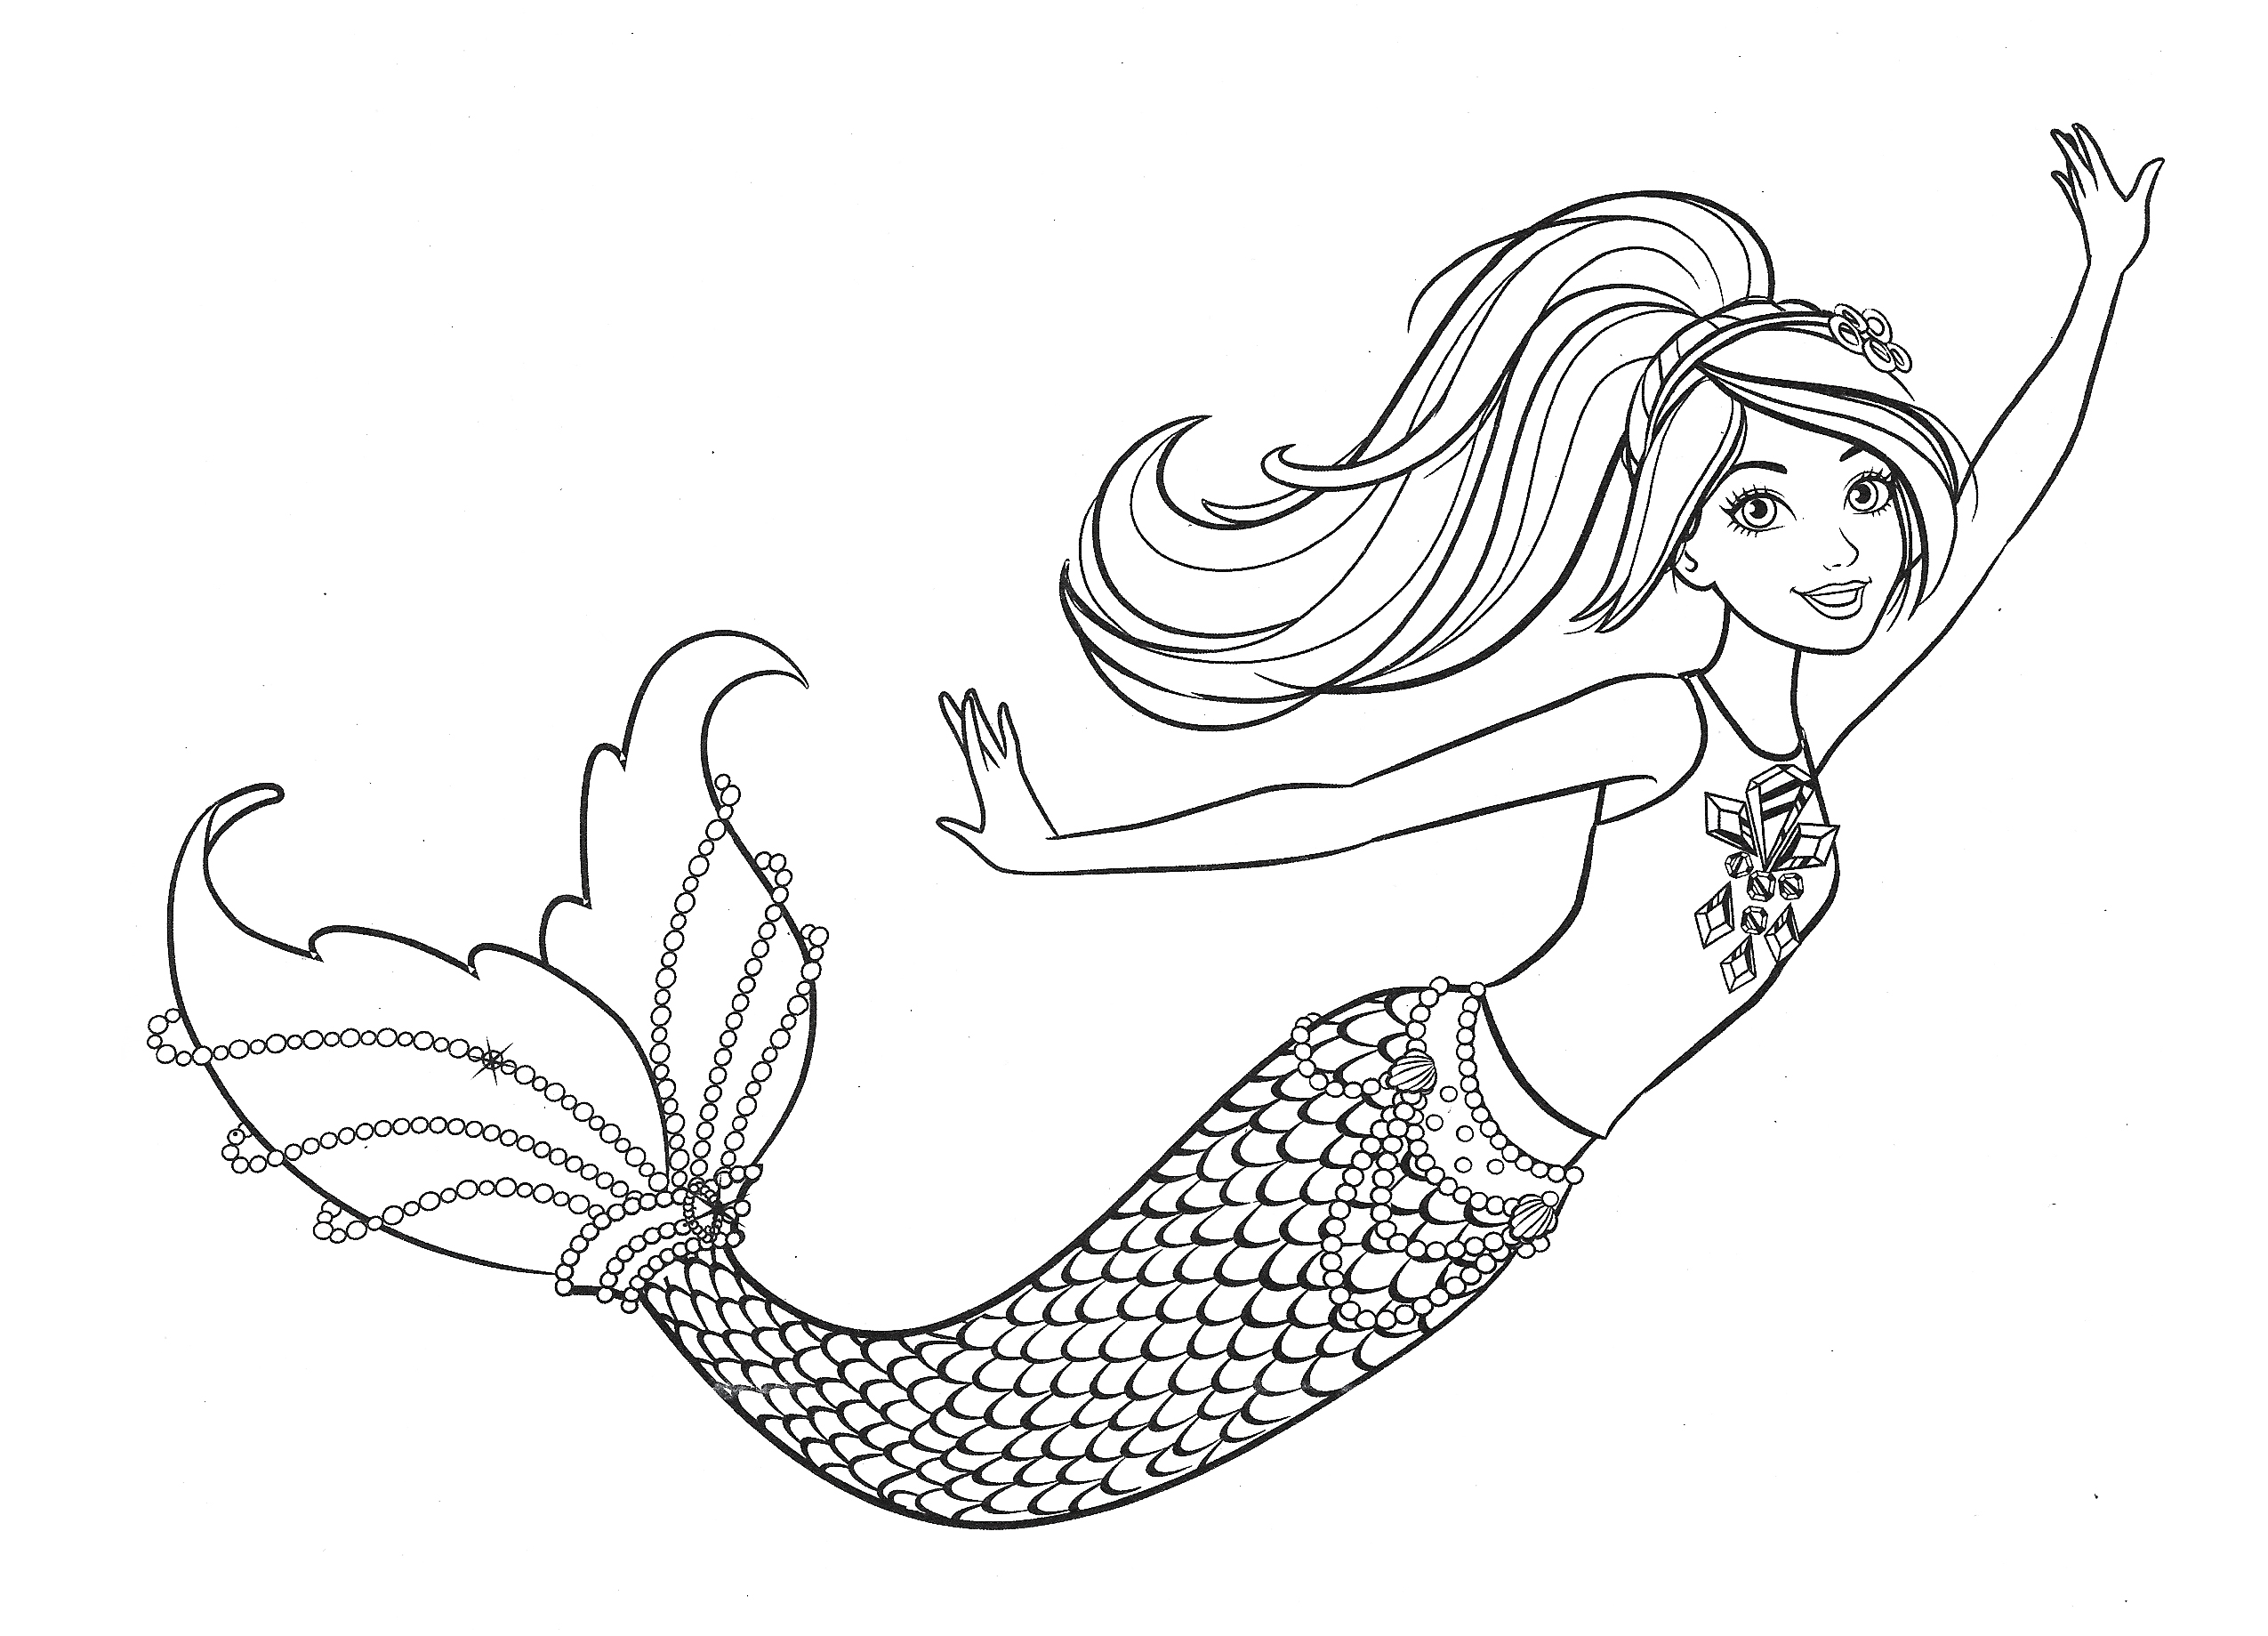 Featured image of post Mermaid Barbie Doll Coloring Pages Barbie doll dancing ballet coloring page to color print and download for free along with bunch of favorite barbie doll coloring page for kids